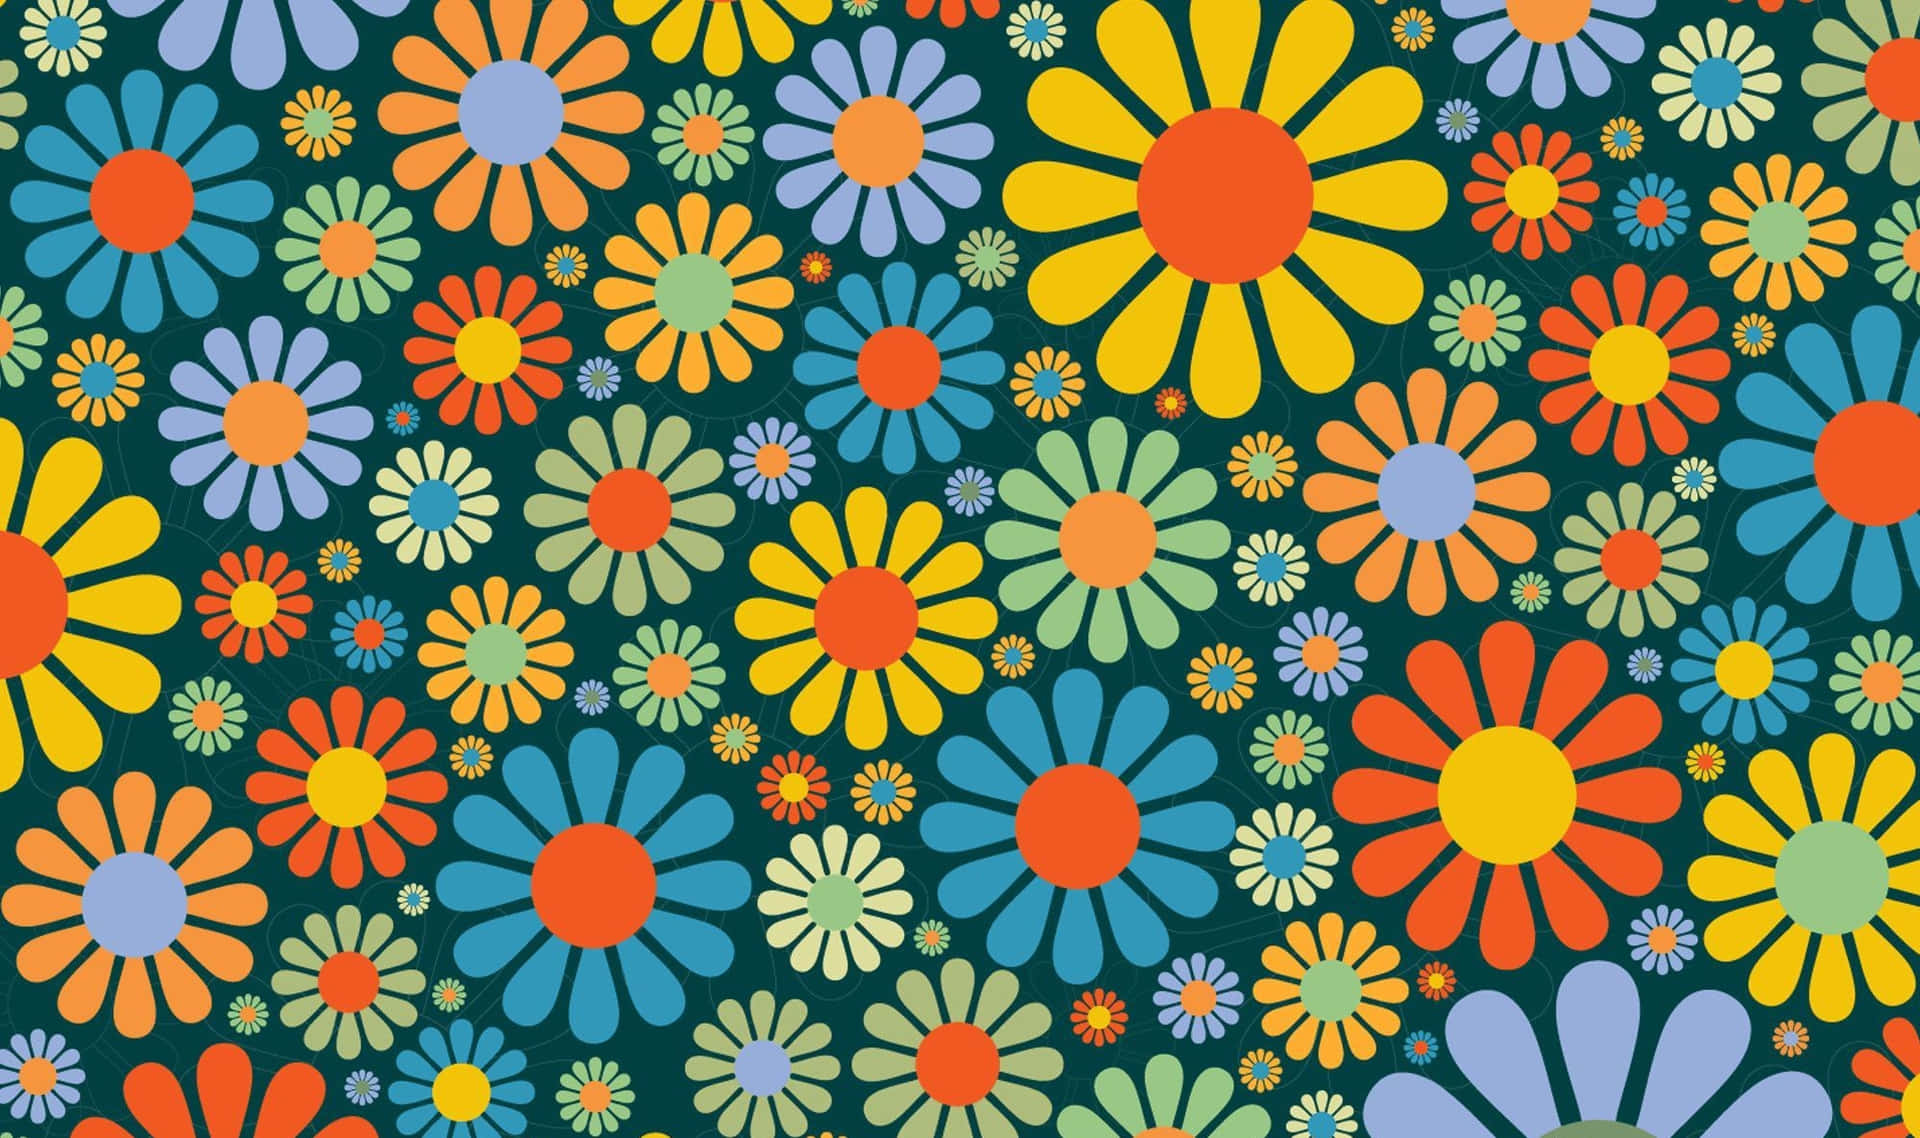 Vibrant Psychedelic 70s Aesthetic Image Wallpaper